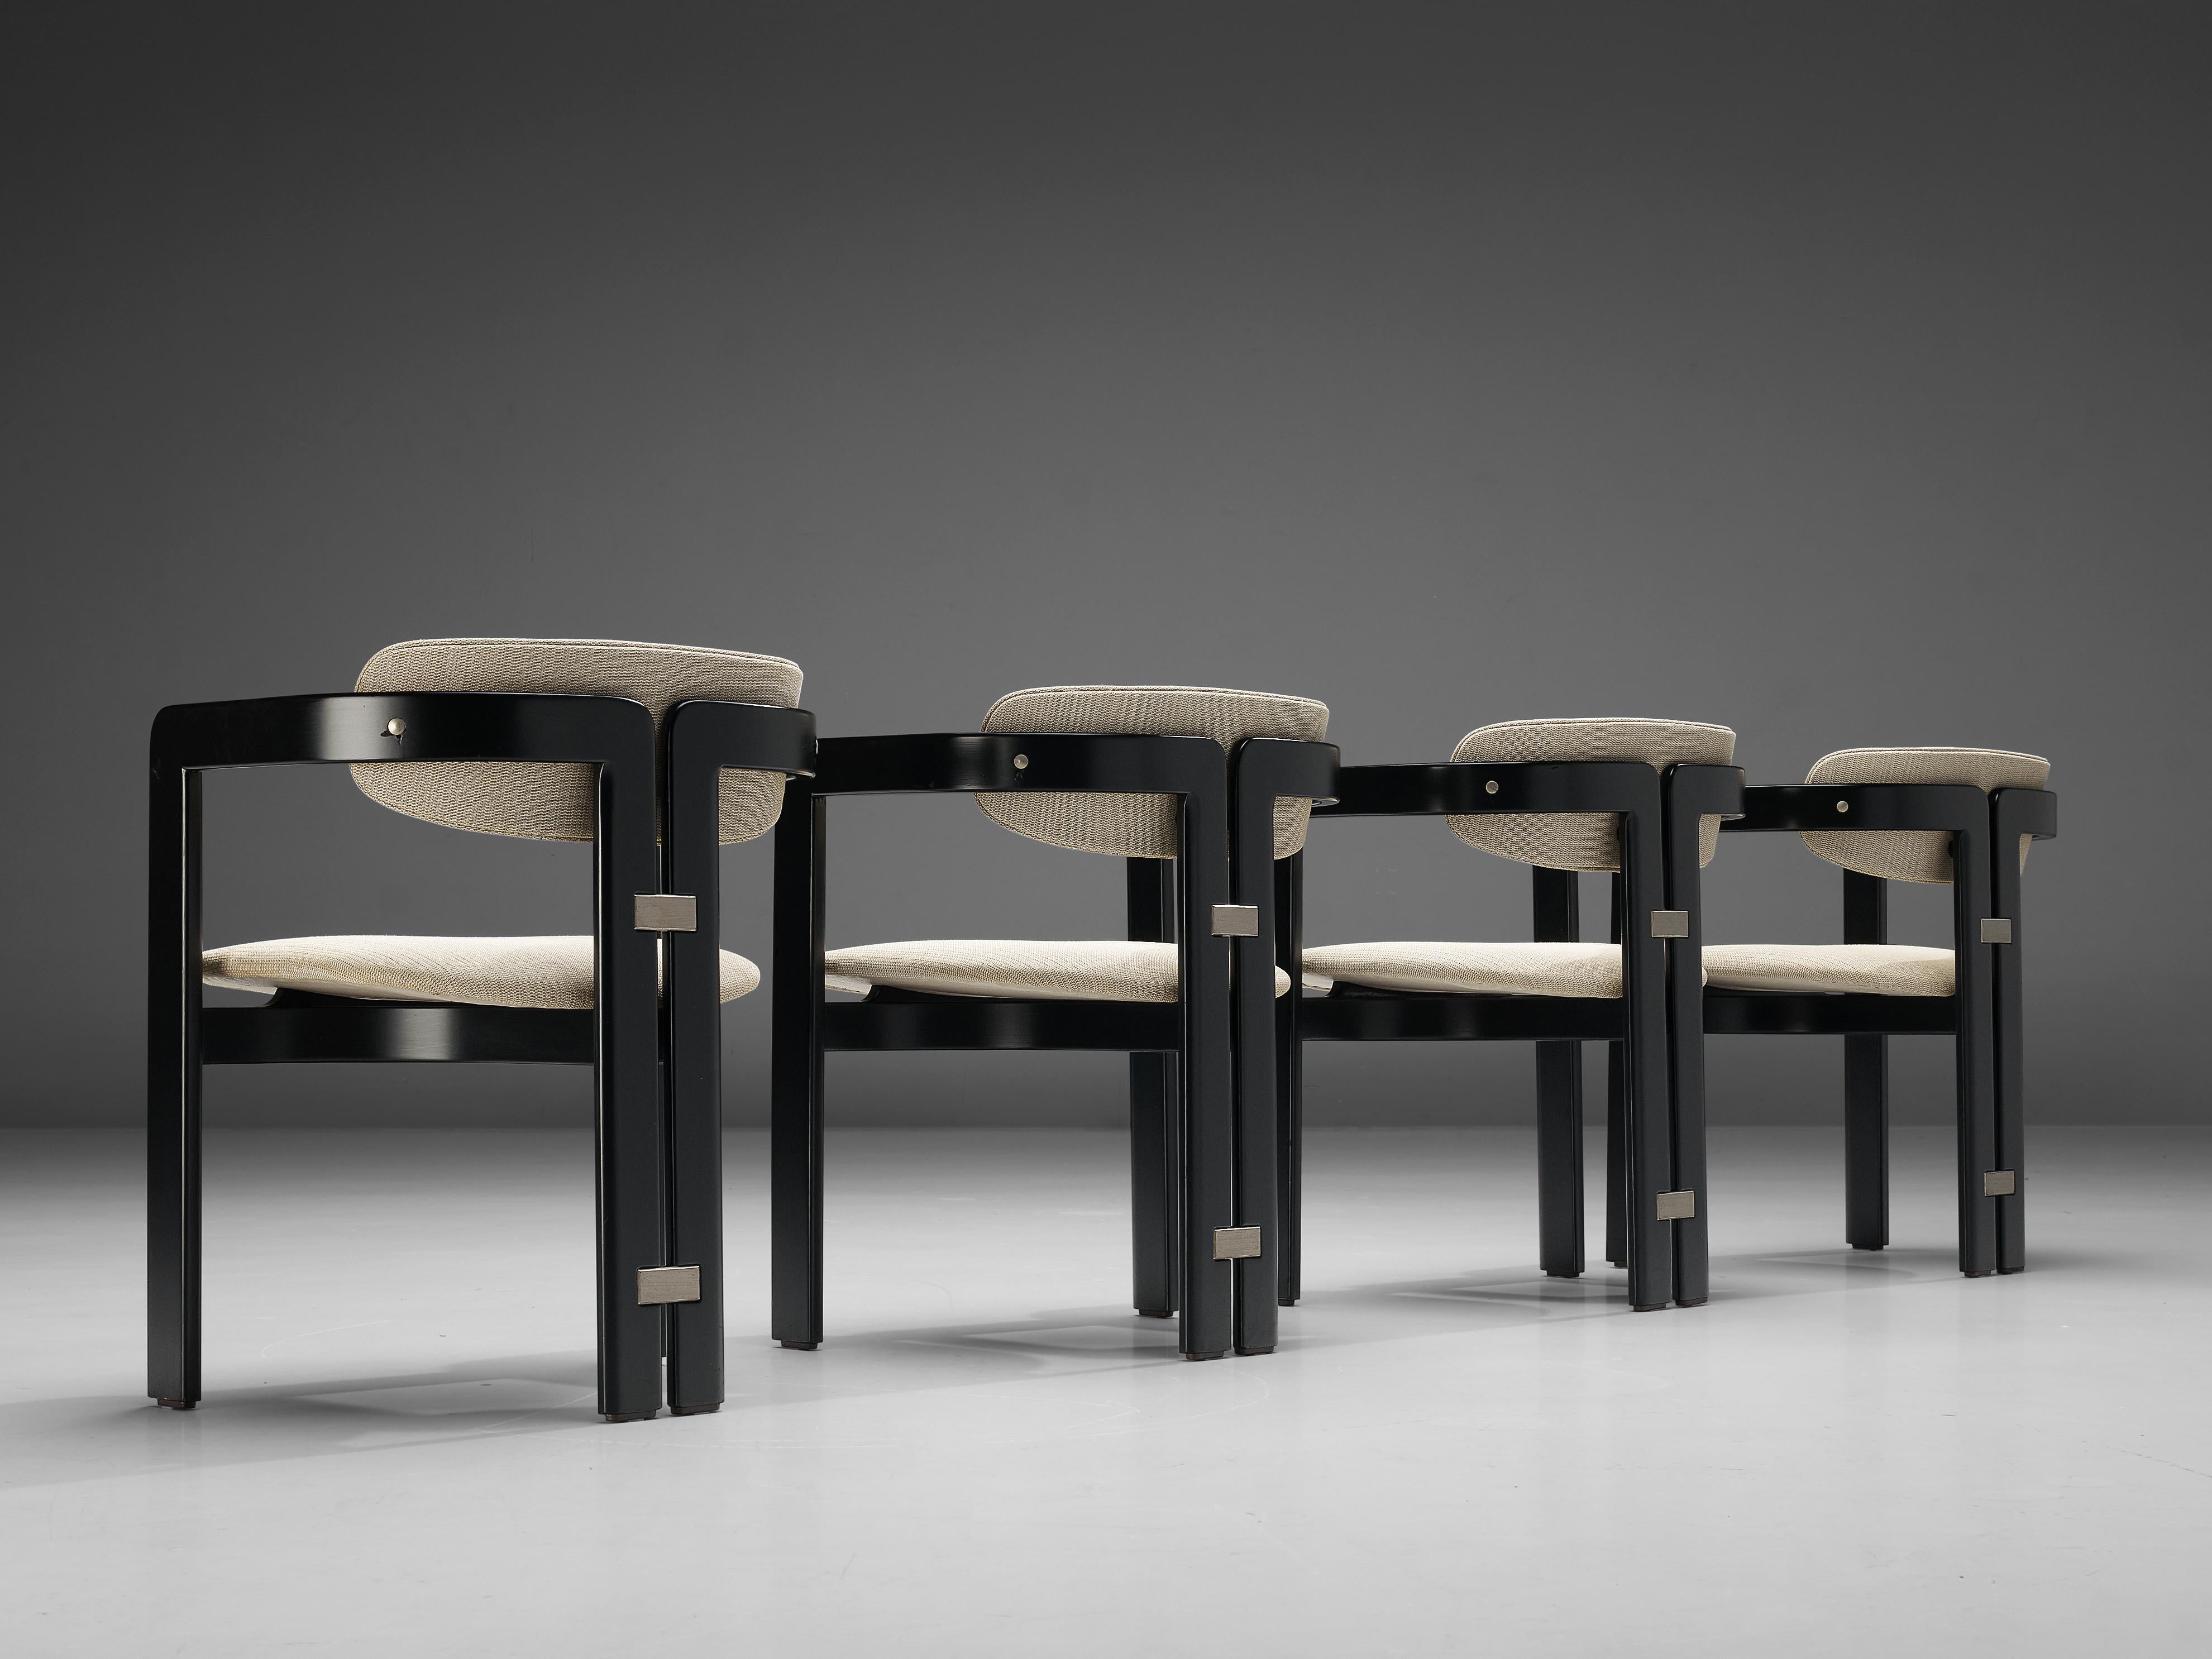 Augusto Savini for Pozzi, 'Pamplona' dining chairs, wood, fabric, aluminum, Italy, 1965

Armchairs in black wood and white upholstery. A characteristic design, simplistic yet very strong in lines and proportions. Wonderful dynamic frame, starting